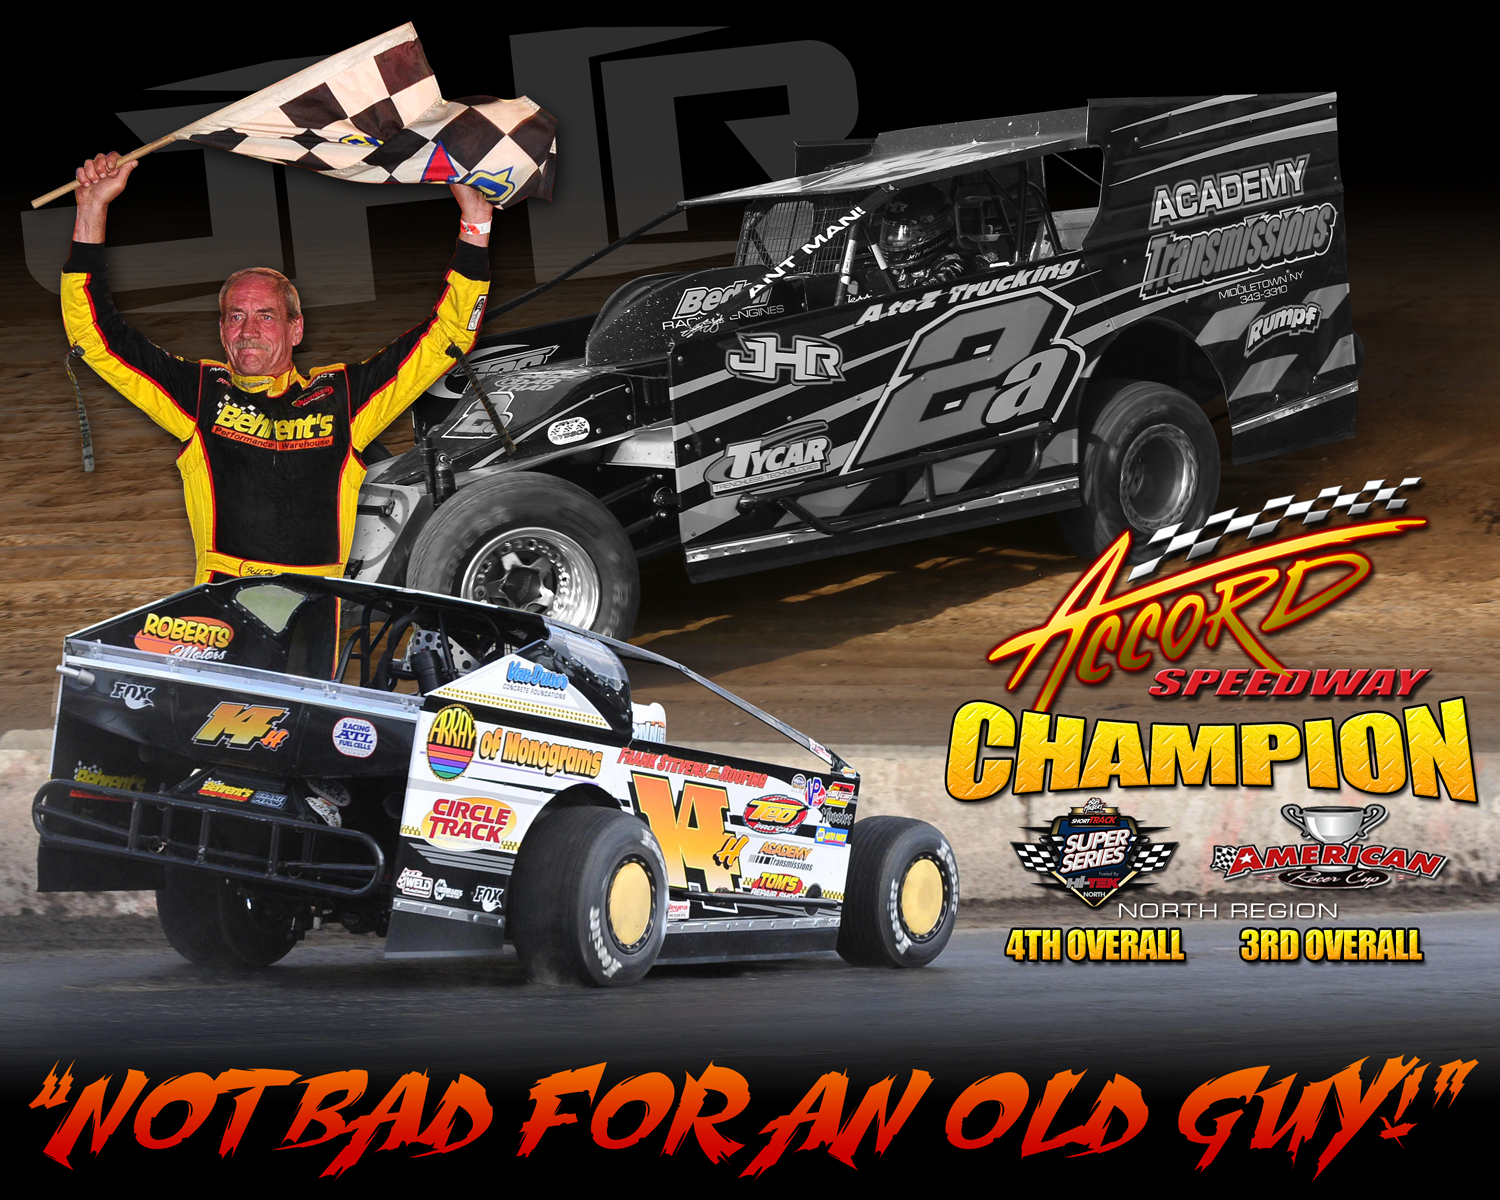 The Jeffer Jeff Heotzler completes a successful 2015 season that included 4 wins and his 5th Accord Speedway Track Championship!